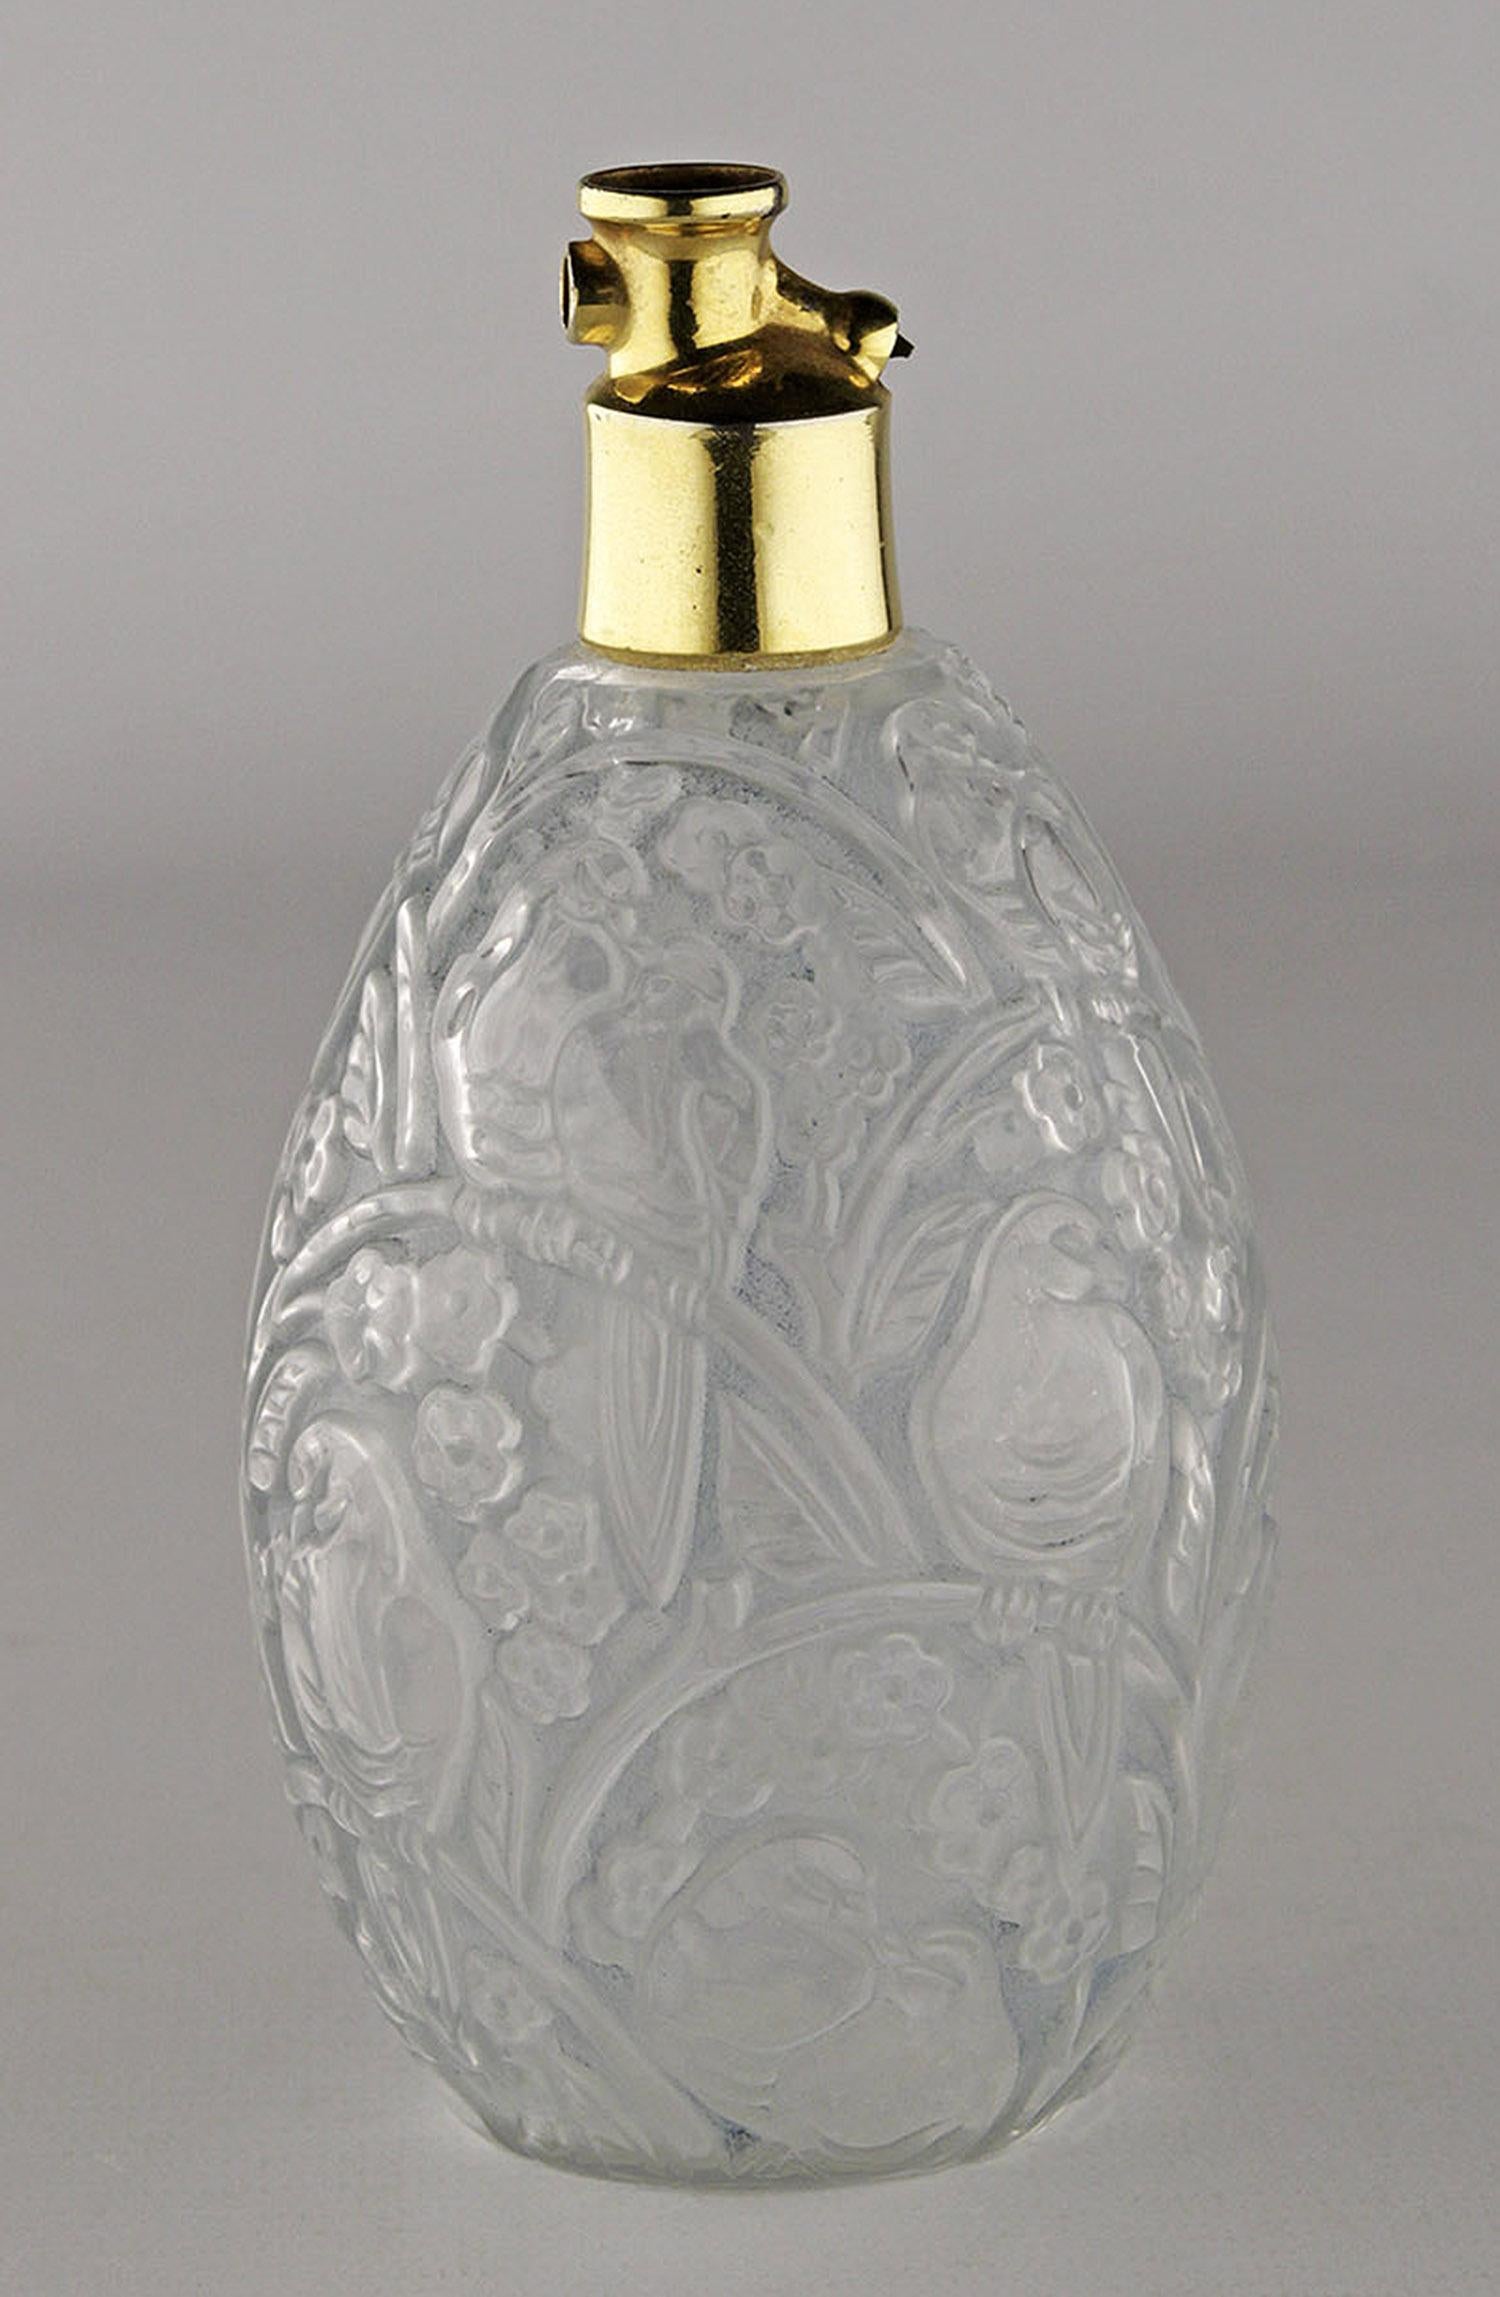 20th Century Pair of Art Déco French Glass Perfume Bottles by ROBJ and Burgun & Schverer For Sale